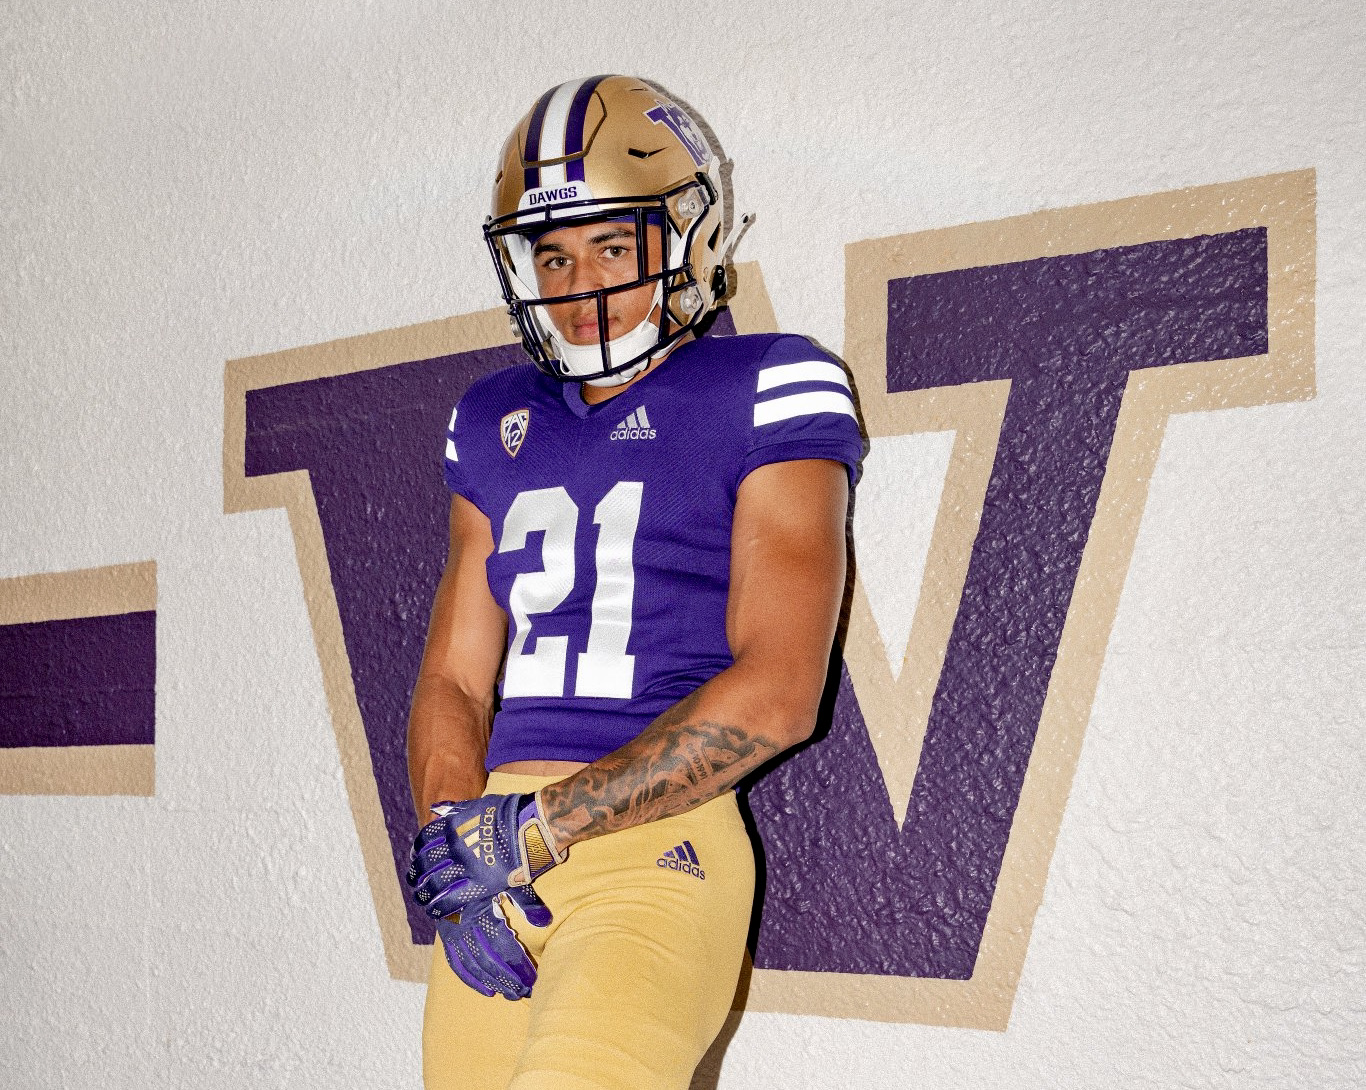 a university of washington football player in the purple and gold home uniform